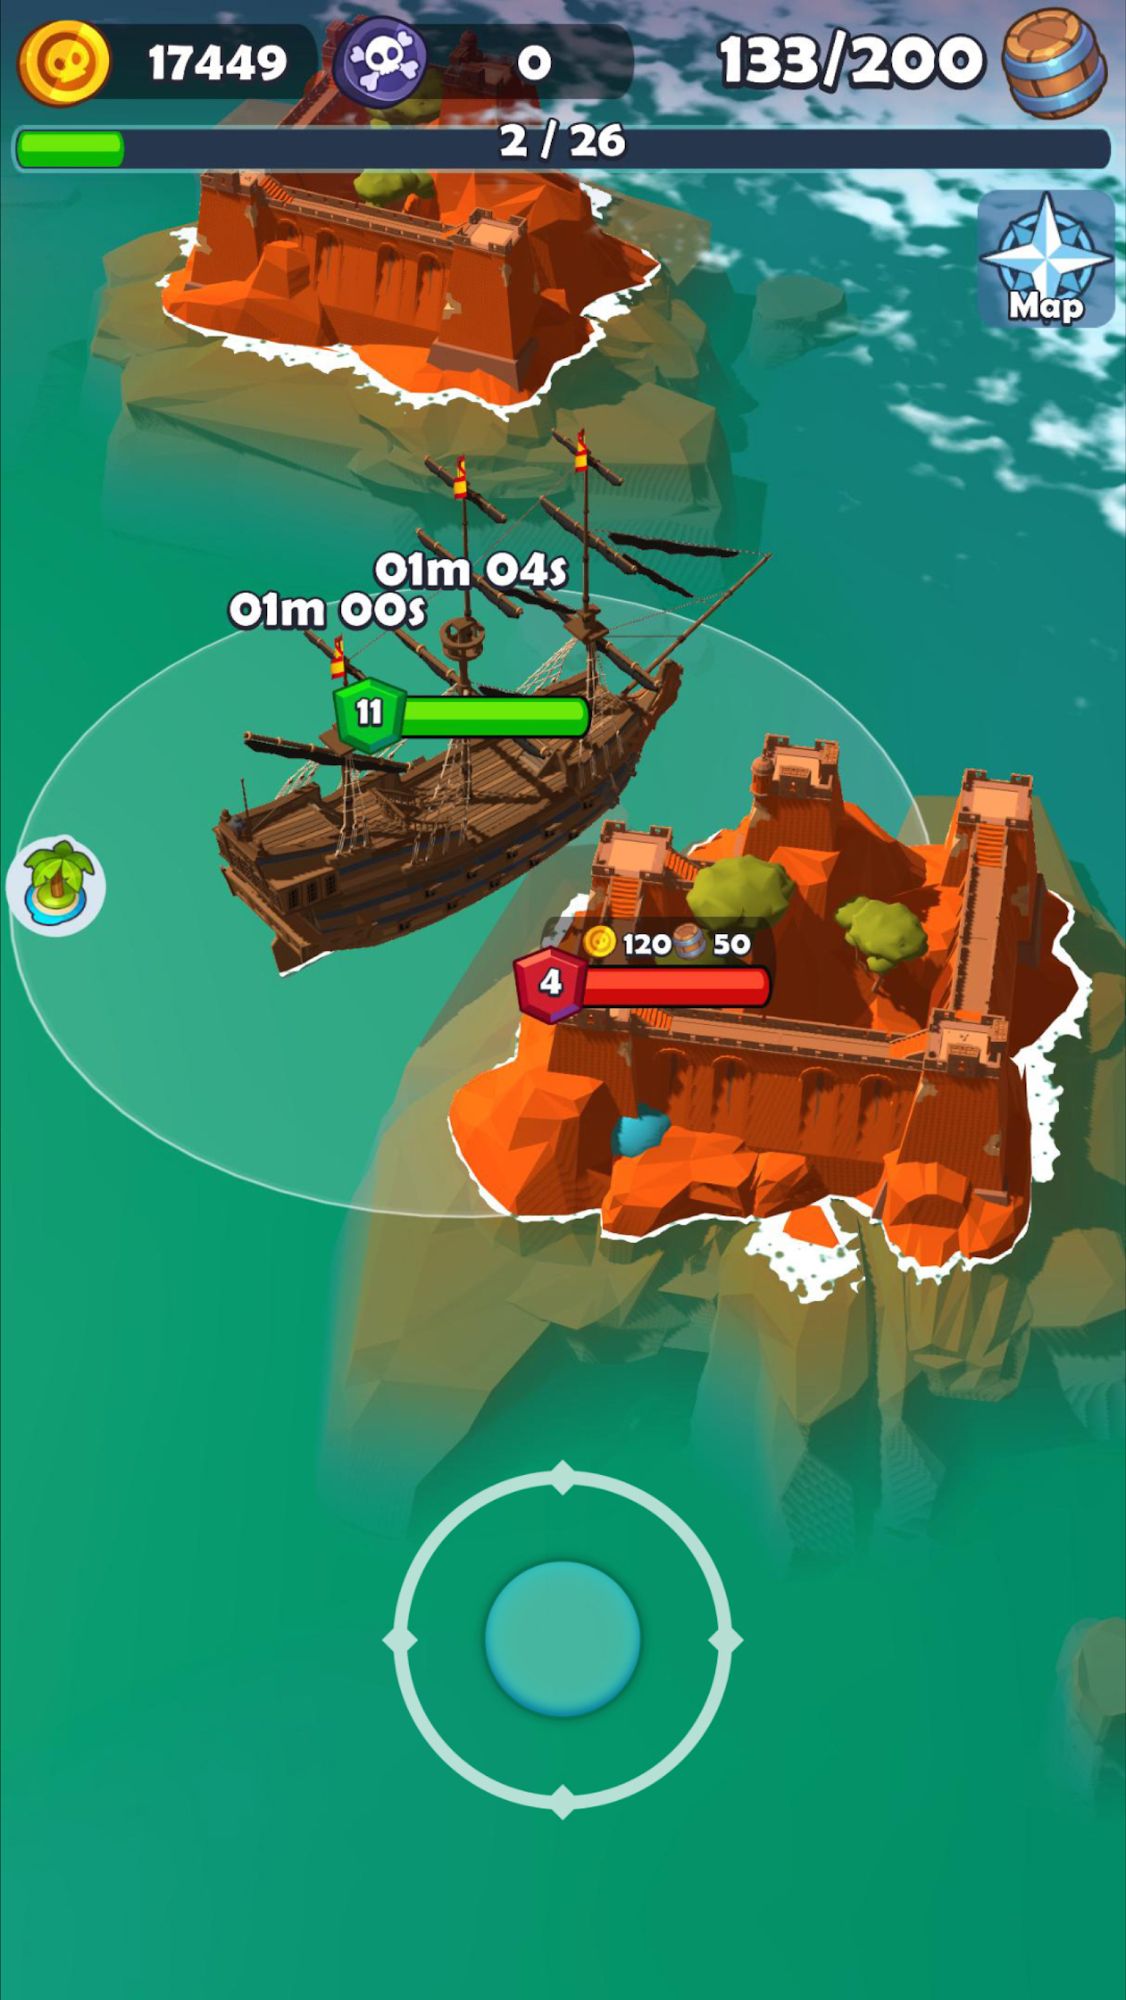 Full version of Android apk app Pirate Raid - Caribbean Battle for tablet and phone.